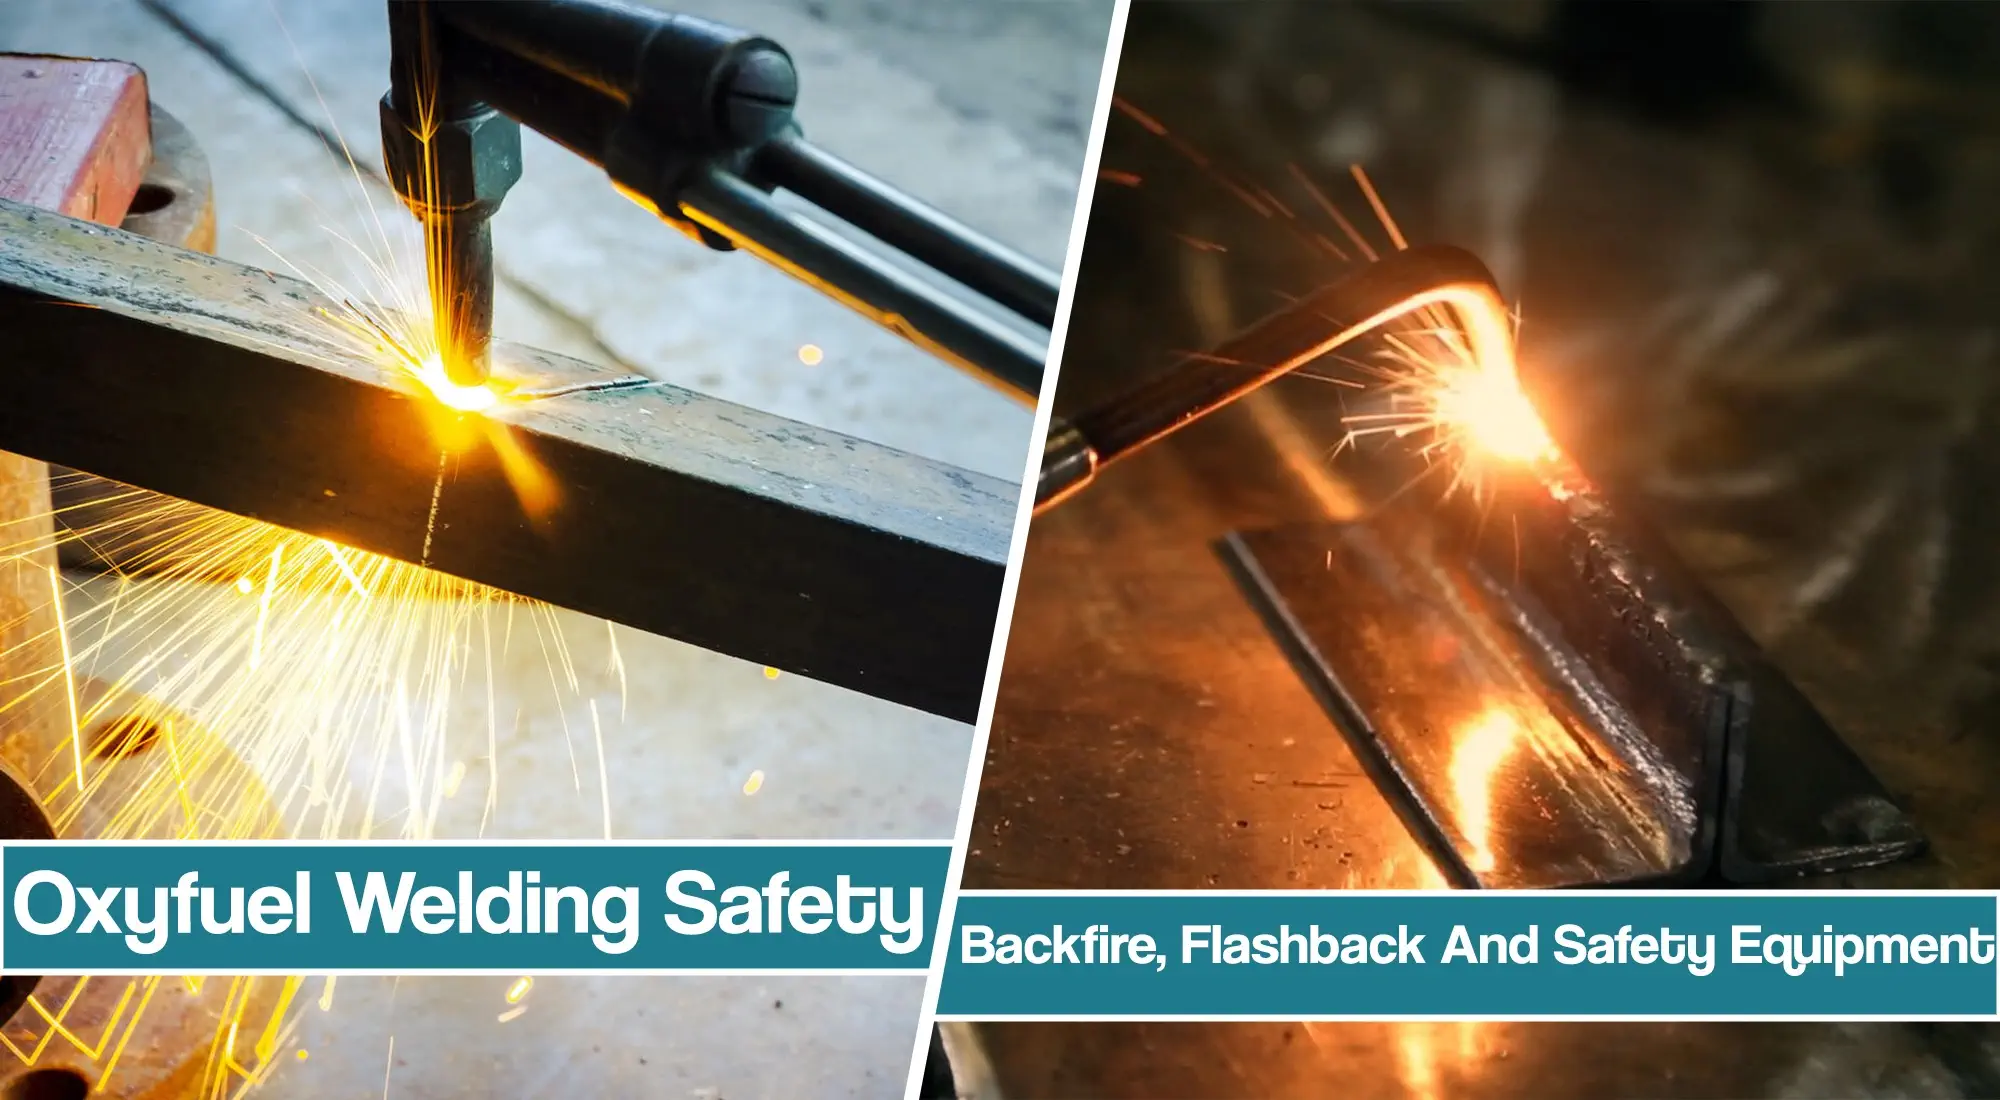 Oxyfuel Welding Safety – What Should You Know About Backfire, Flashback, and Flashback Arrestors